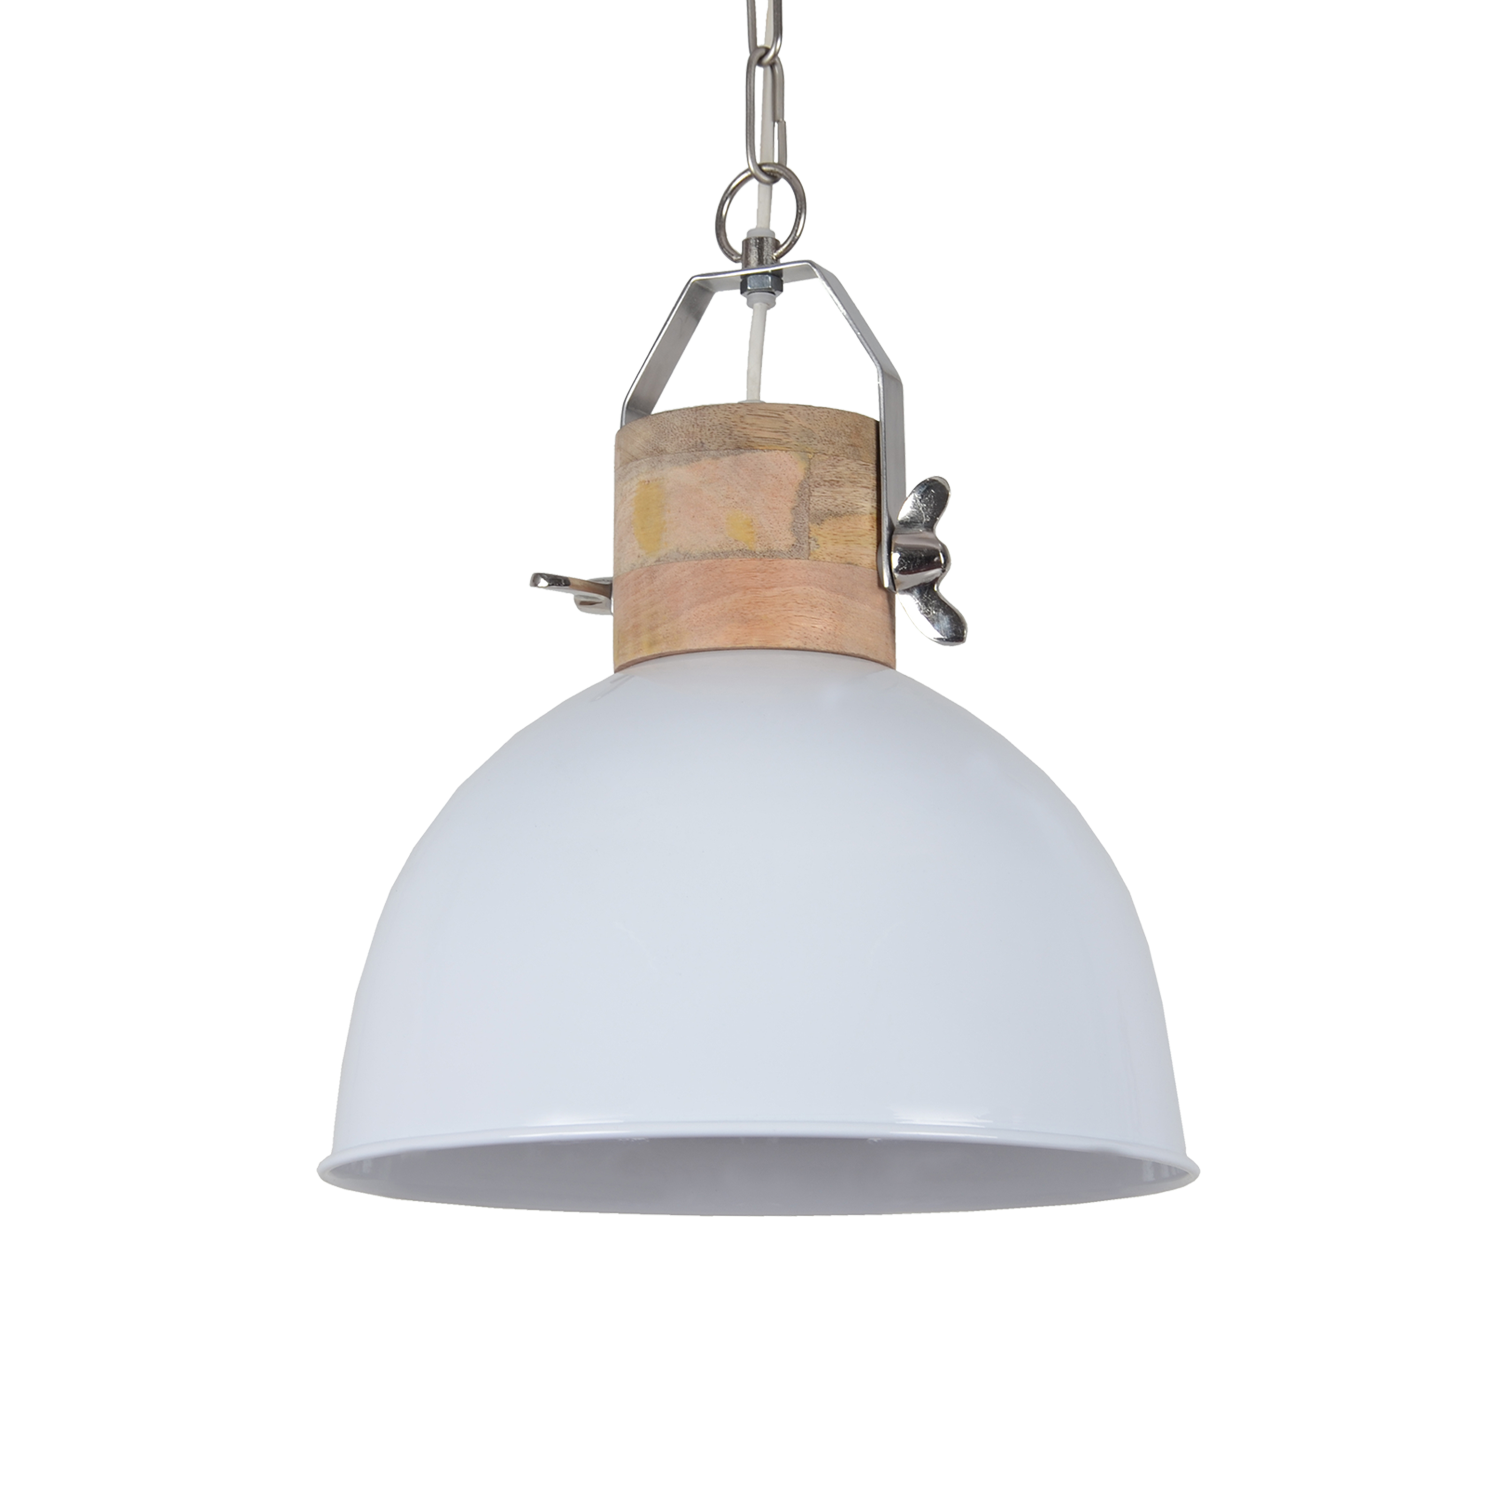 Hanglamp Fabriano 30 cm glans wit